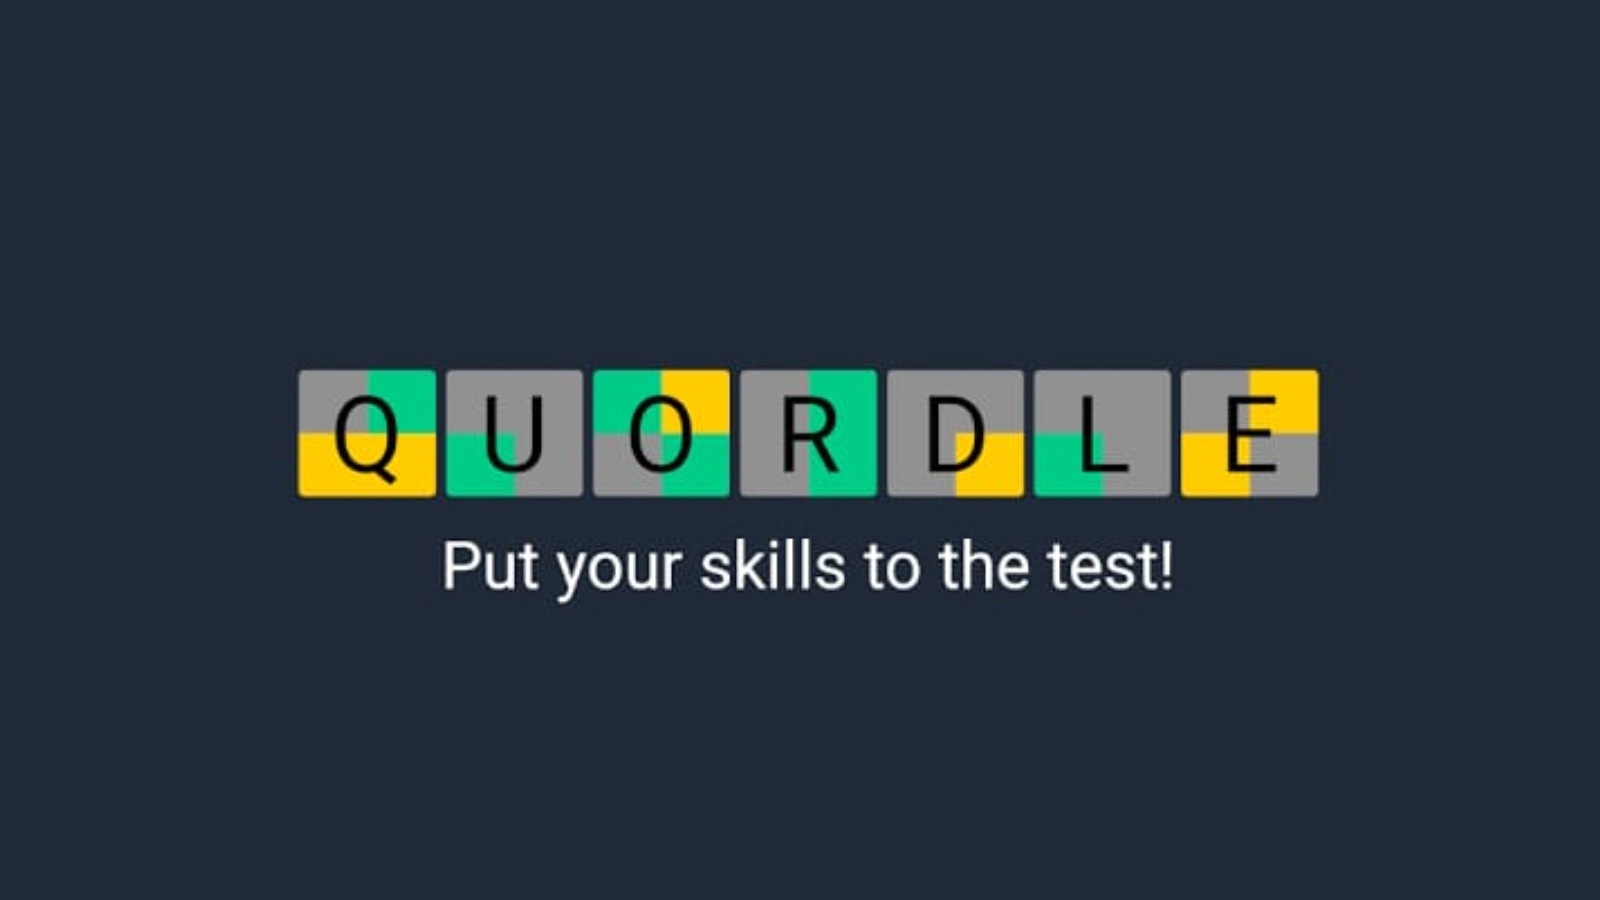 How to play Quordle?